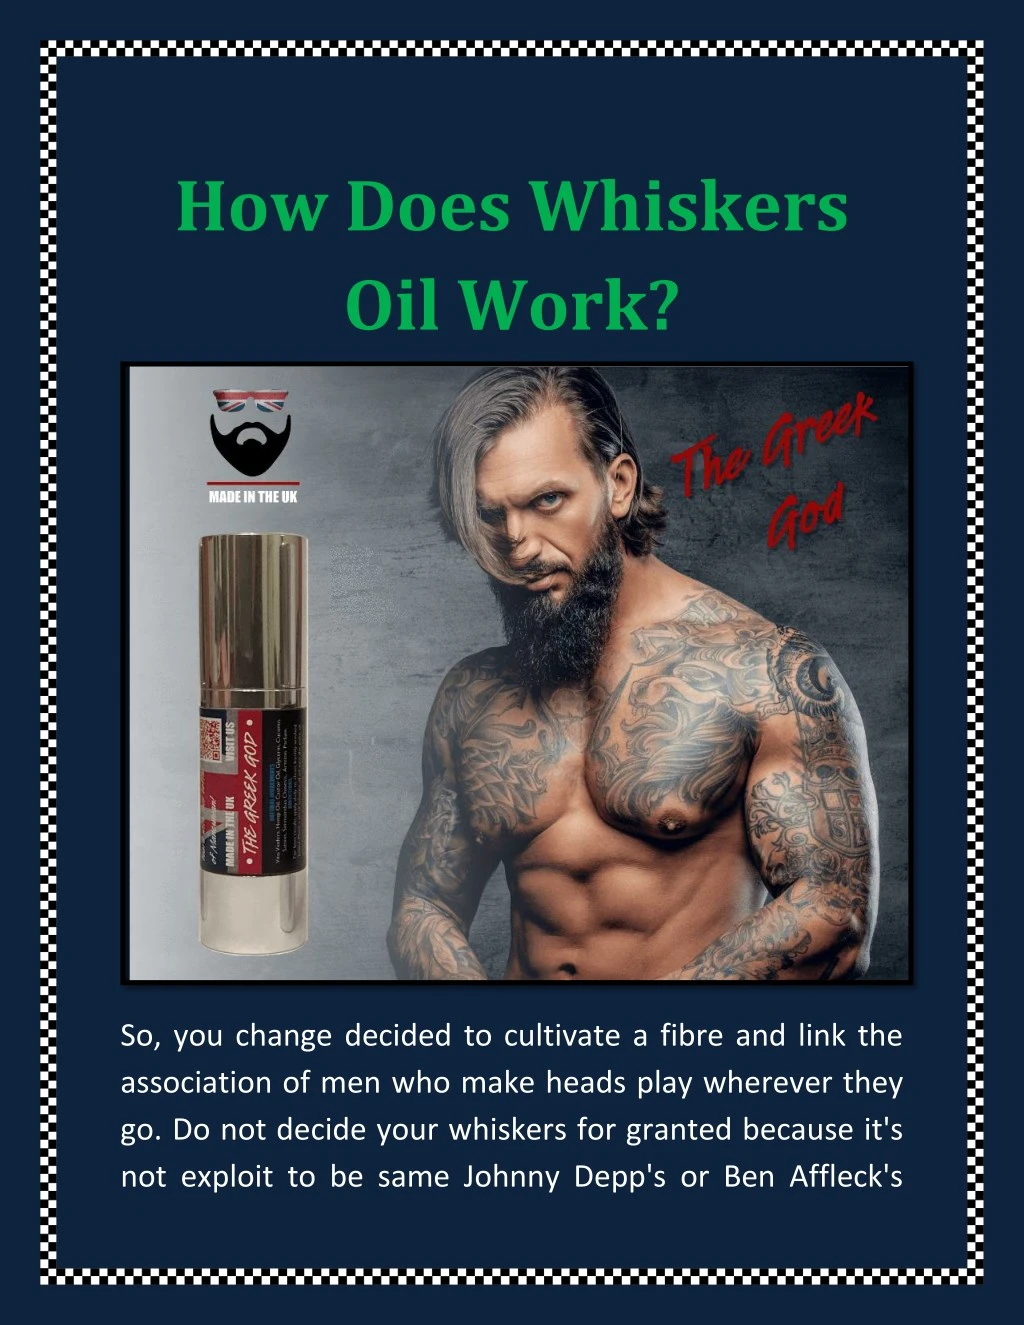 how does whiskers oil work